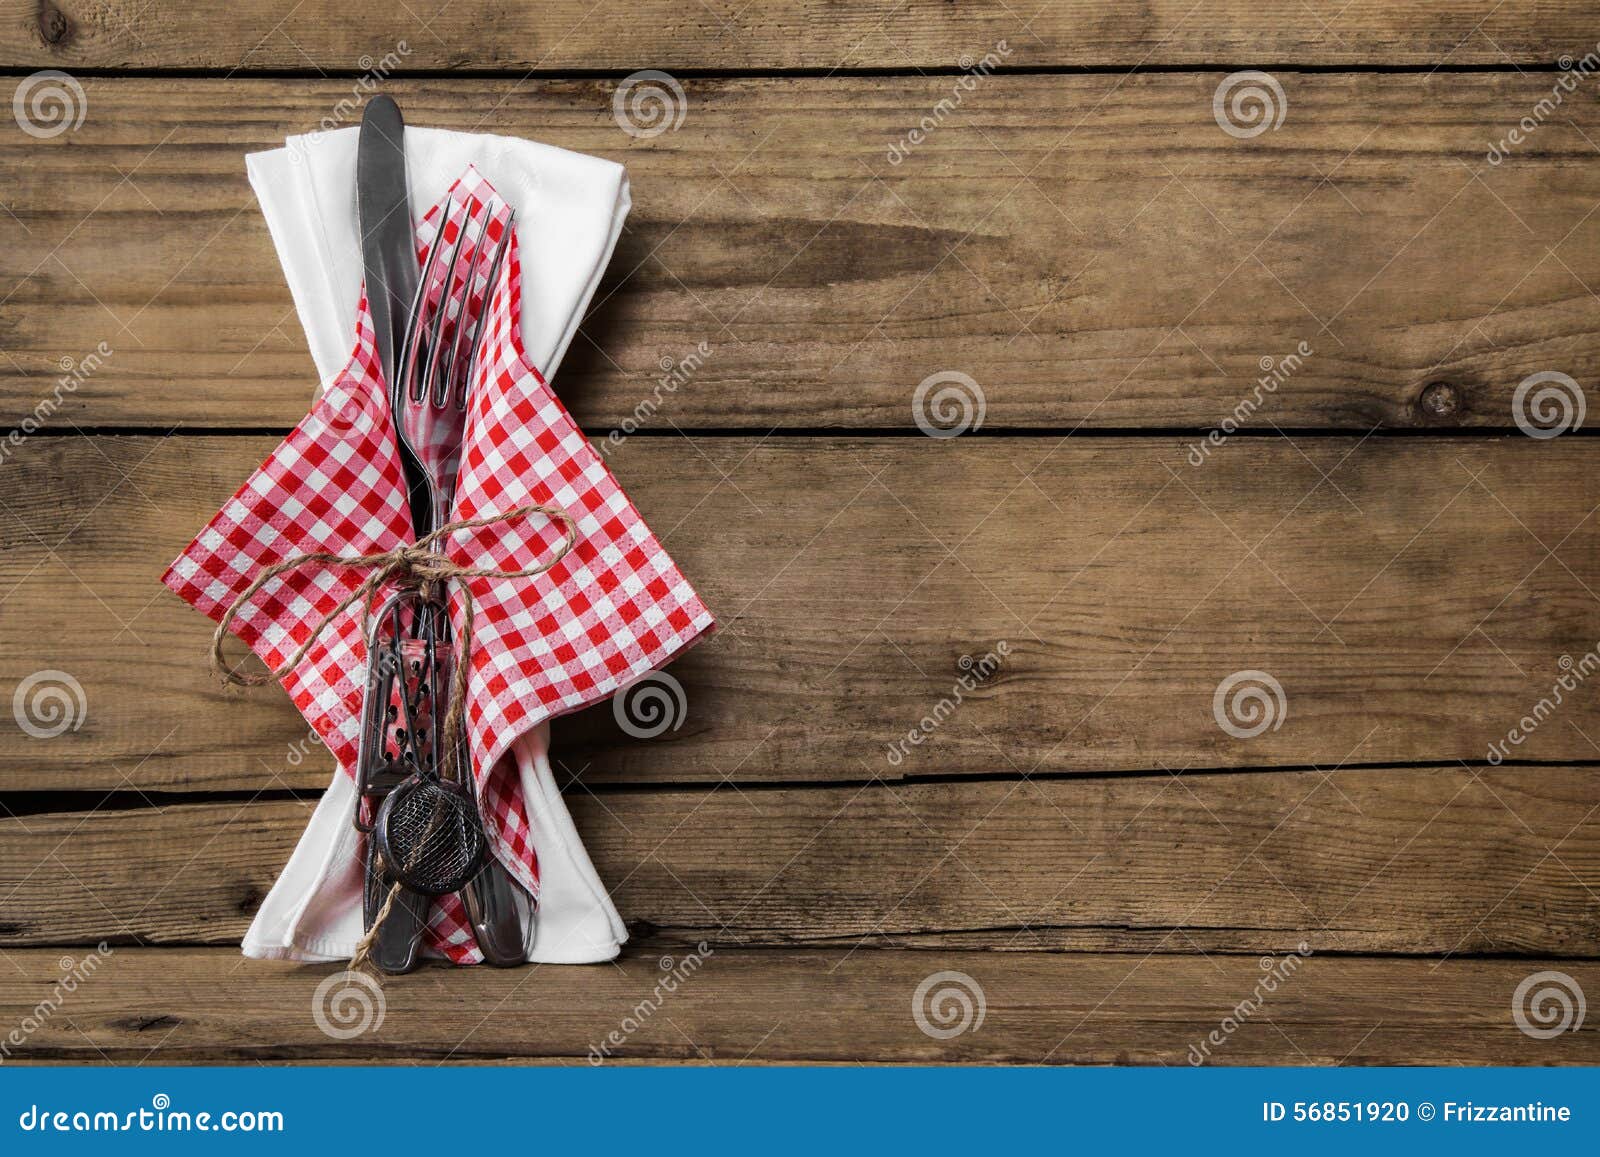 fork and knife set with red white checked napkin on old rustic w